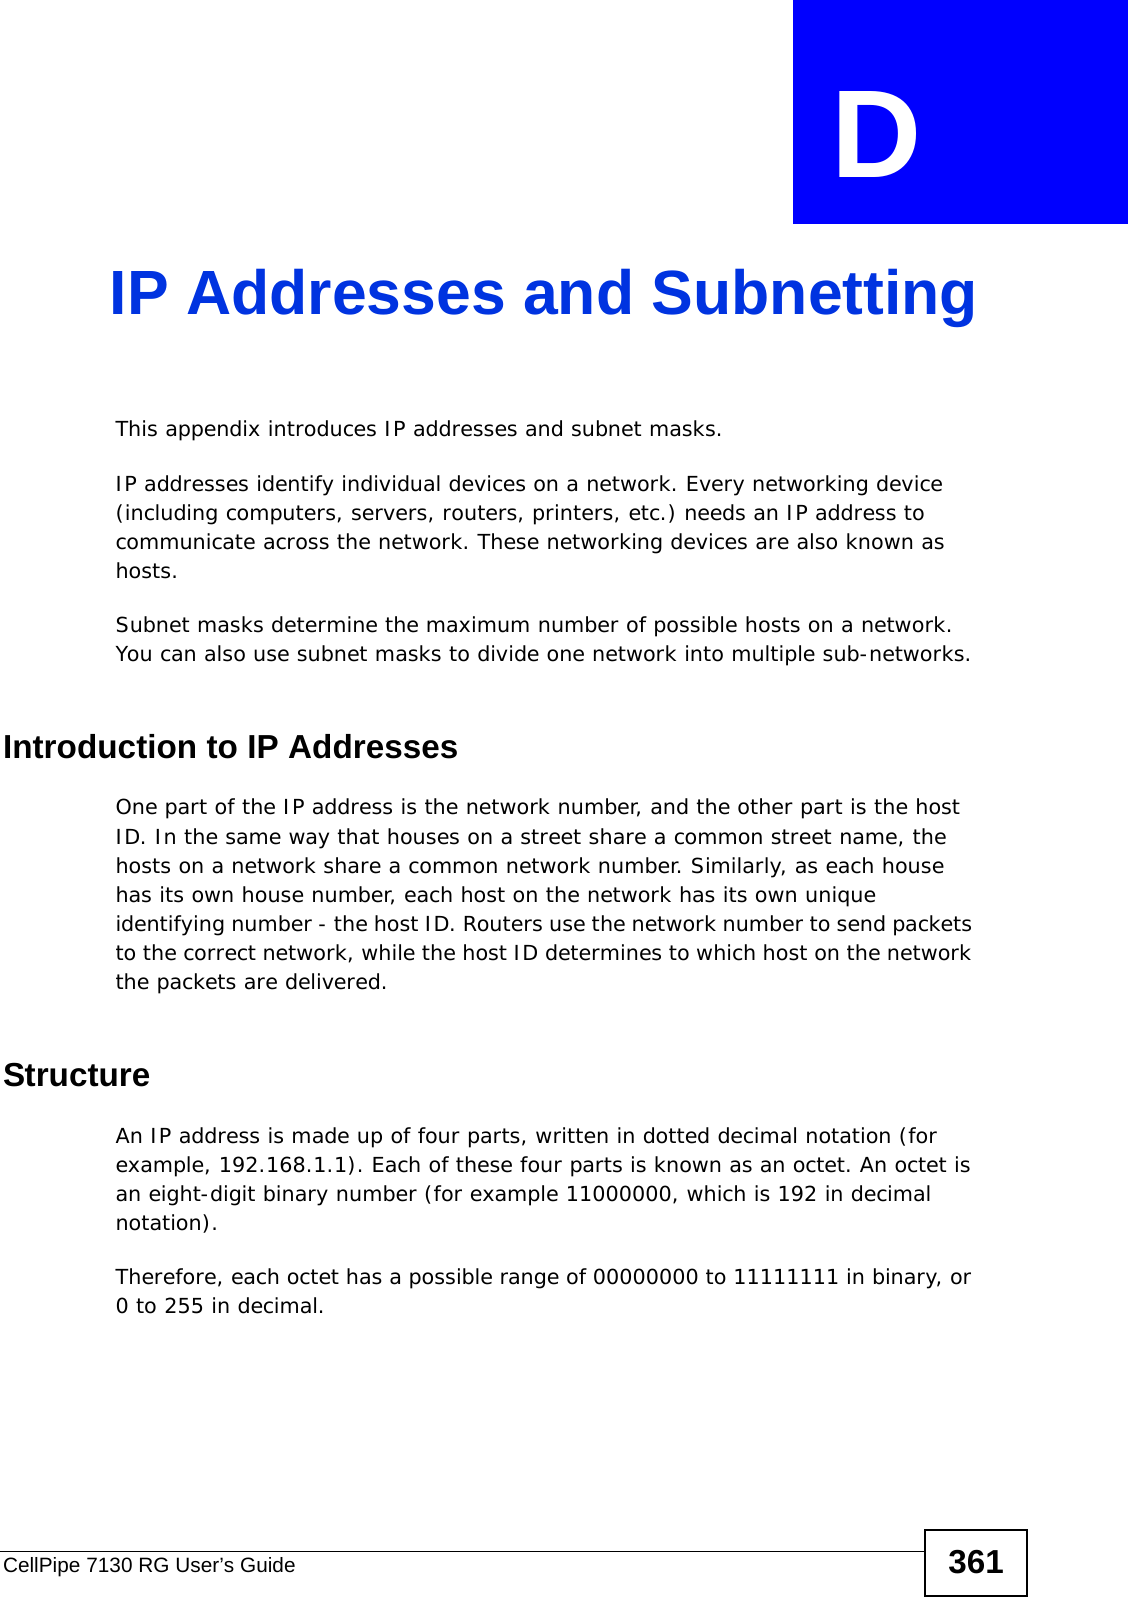 CellPipe 7130 RG User’s Guide 361APPENDIX  D IP Addresses and SubnettingThis appendix introduces IP addresses and subnet masks. IP addresses identify individual devices on a network. Every networking device (including computers, servers, routers, printers, etc.) needs an IP address to communicate across the network. These networking devices are also known as hosts.Subnet masks determine the maximum number of possible hosts on a network. You can also use subnet masks to divide one network into multiple sub-networks.Introduction to IP AddressesOne part of the IP address is the network number, and the other part is the host ID. In the same way that houses on a street share a common street name, the hosts on a network share a common network number. Similarly, as each house has its own house number, each host on the network has its own unique identifying number - the host ID. Routers use the network number to send packets to the correct network, while the host ID determines to which host on the network the packets are delivered.StructureAn IP address is made up of four parts, written in dotted decimal notation (for example, 192.168.1.1). Each of these four parts is known as an octet. An octet is an eight-digit binary number (for example 11000000, which is 192 in decimal notation). Therefore, each octet has a possible range of 00000000 to 11111111 in binary, or 0 to 255 in decimal.